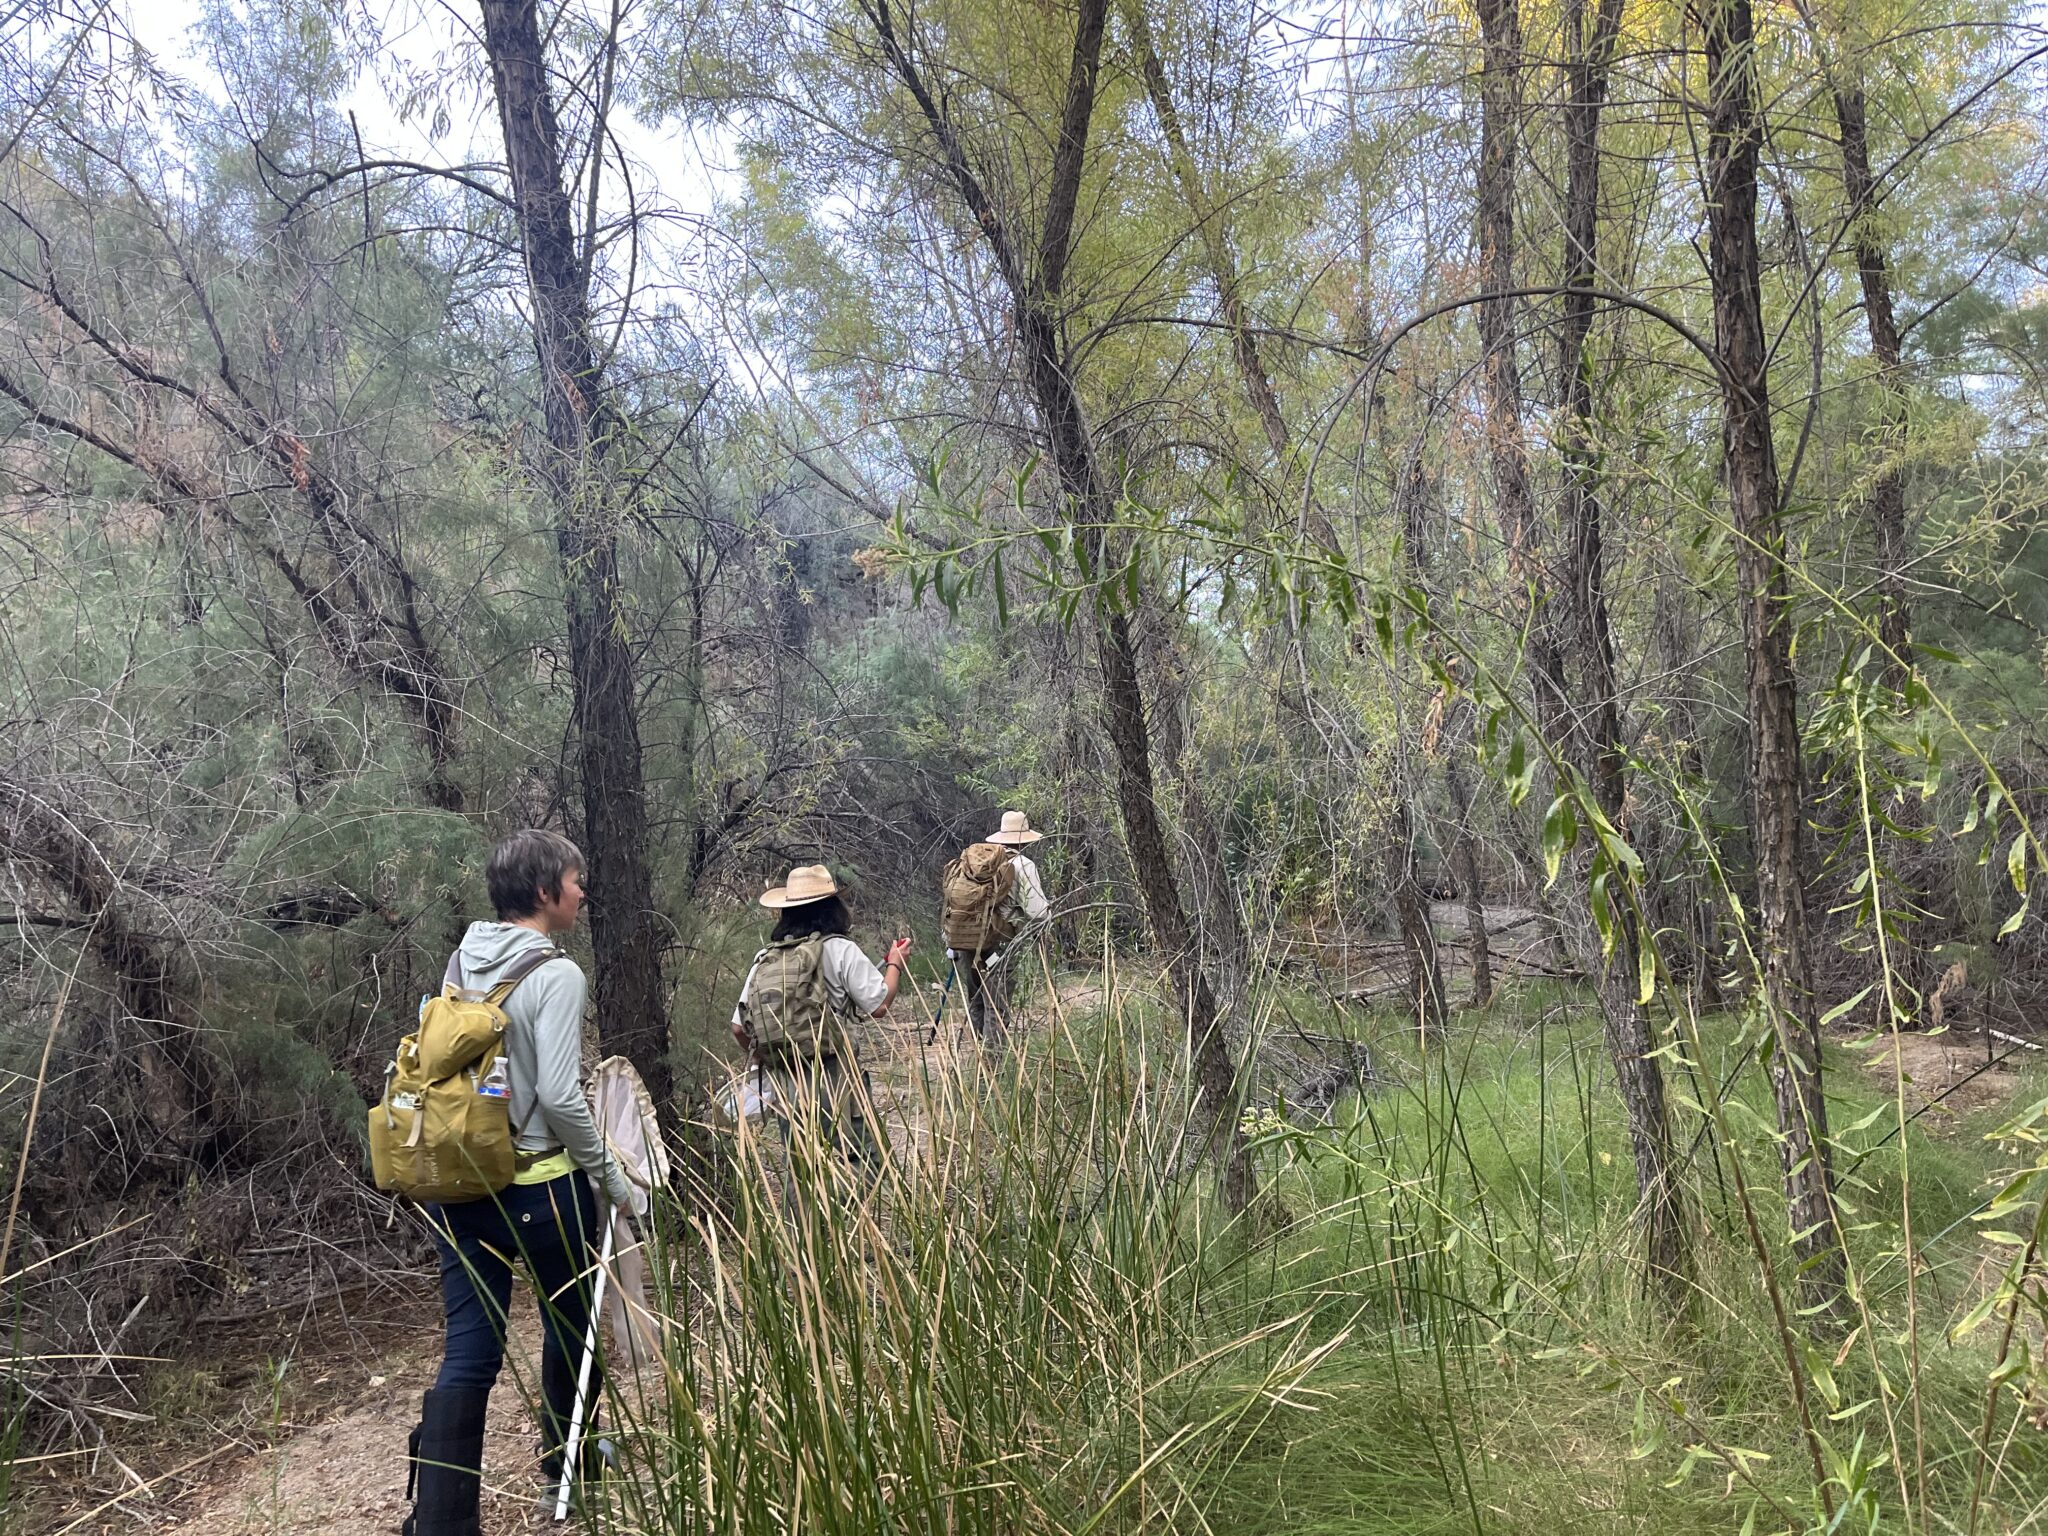 Three people with backpacks and insect nets hike through trees and grass.